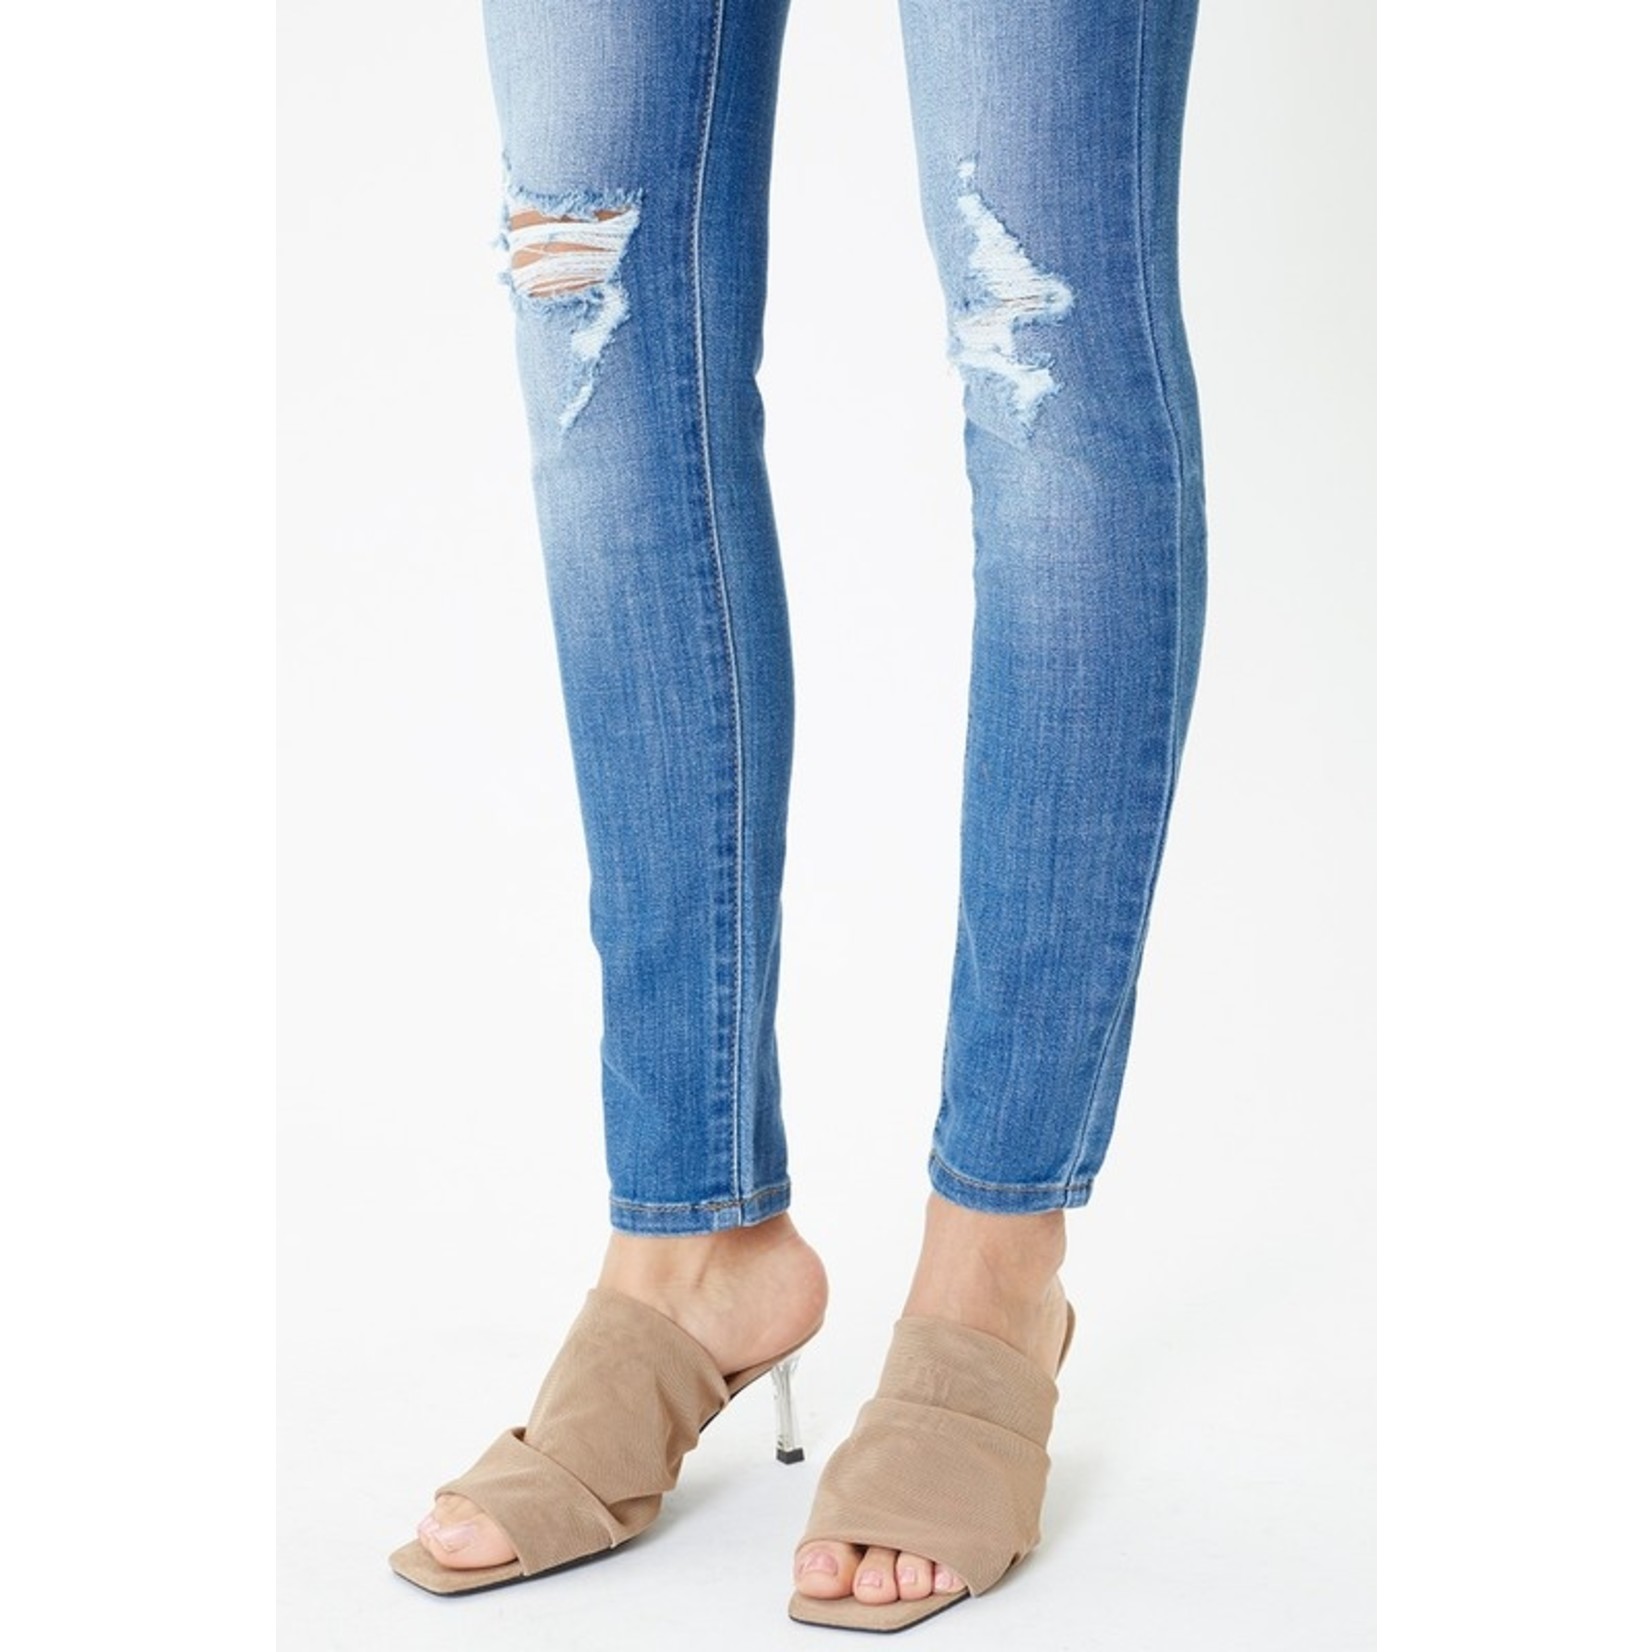 The Mid Rise Distressed Skinny